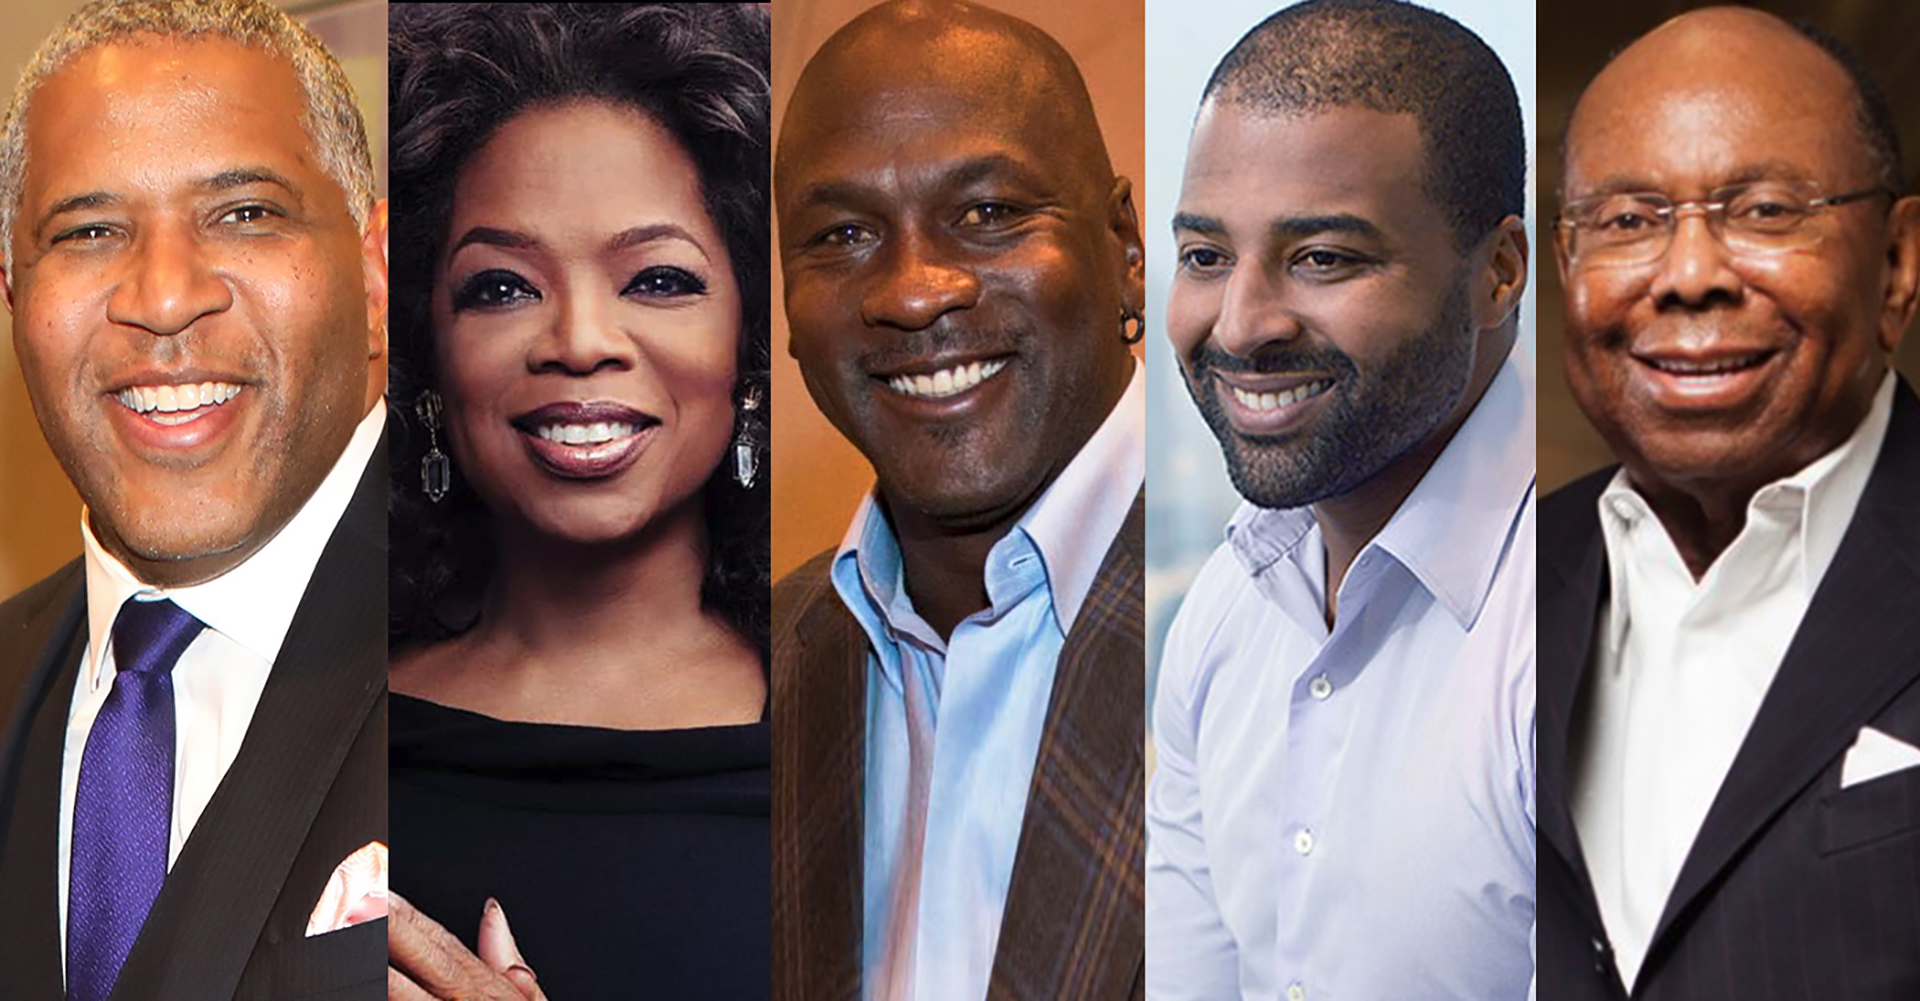 These Business leaders are major Black donors to HBCUs